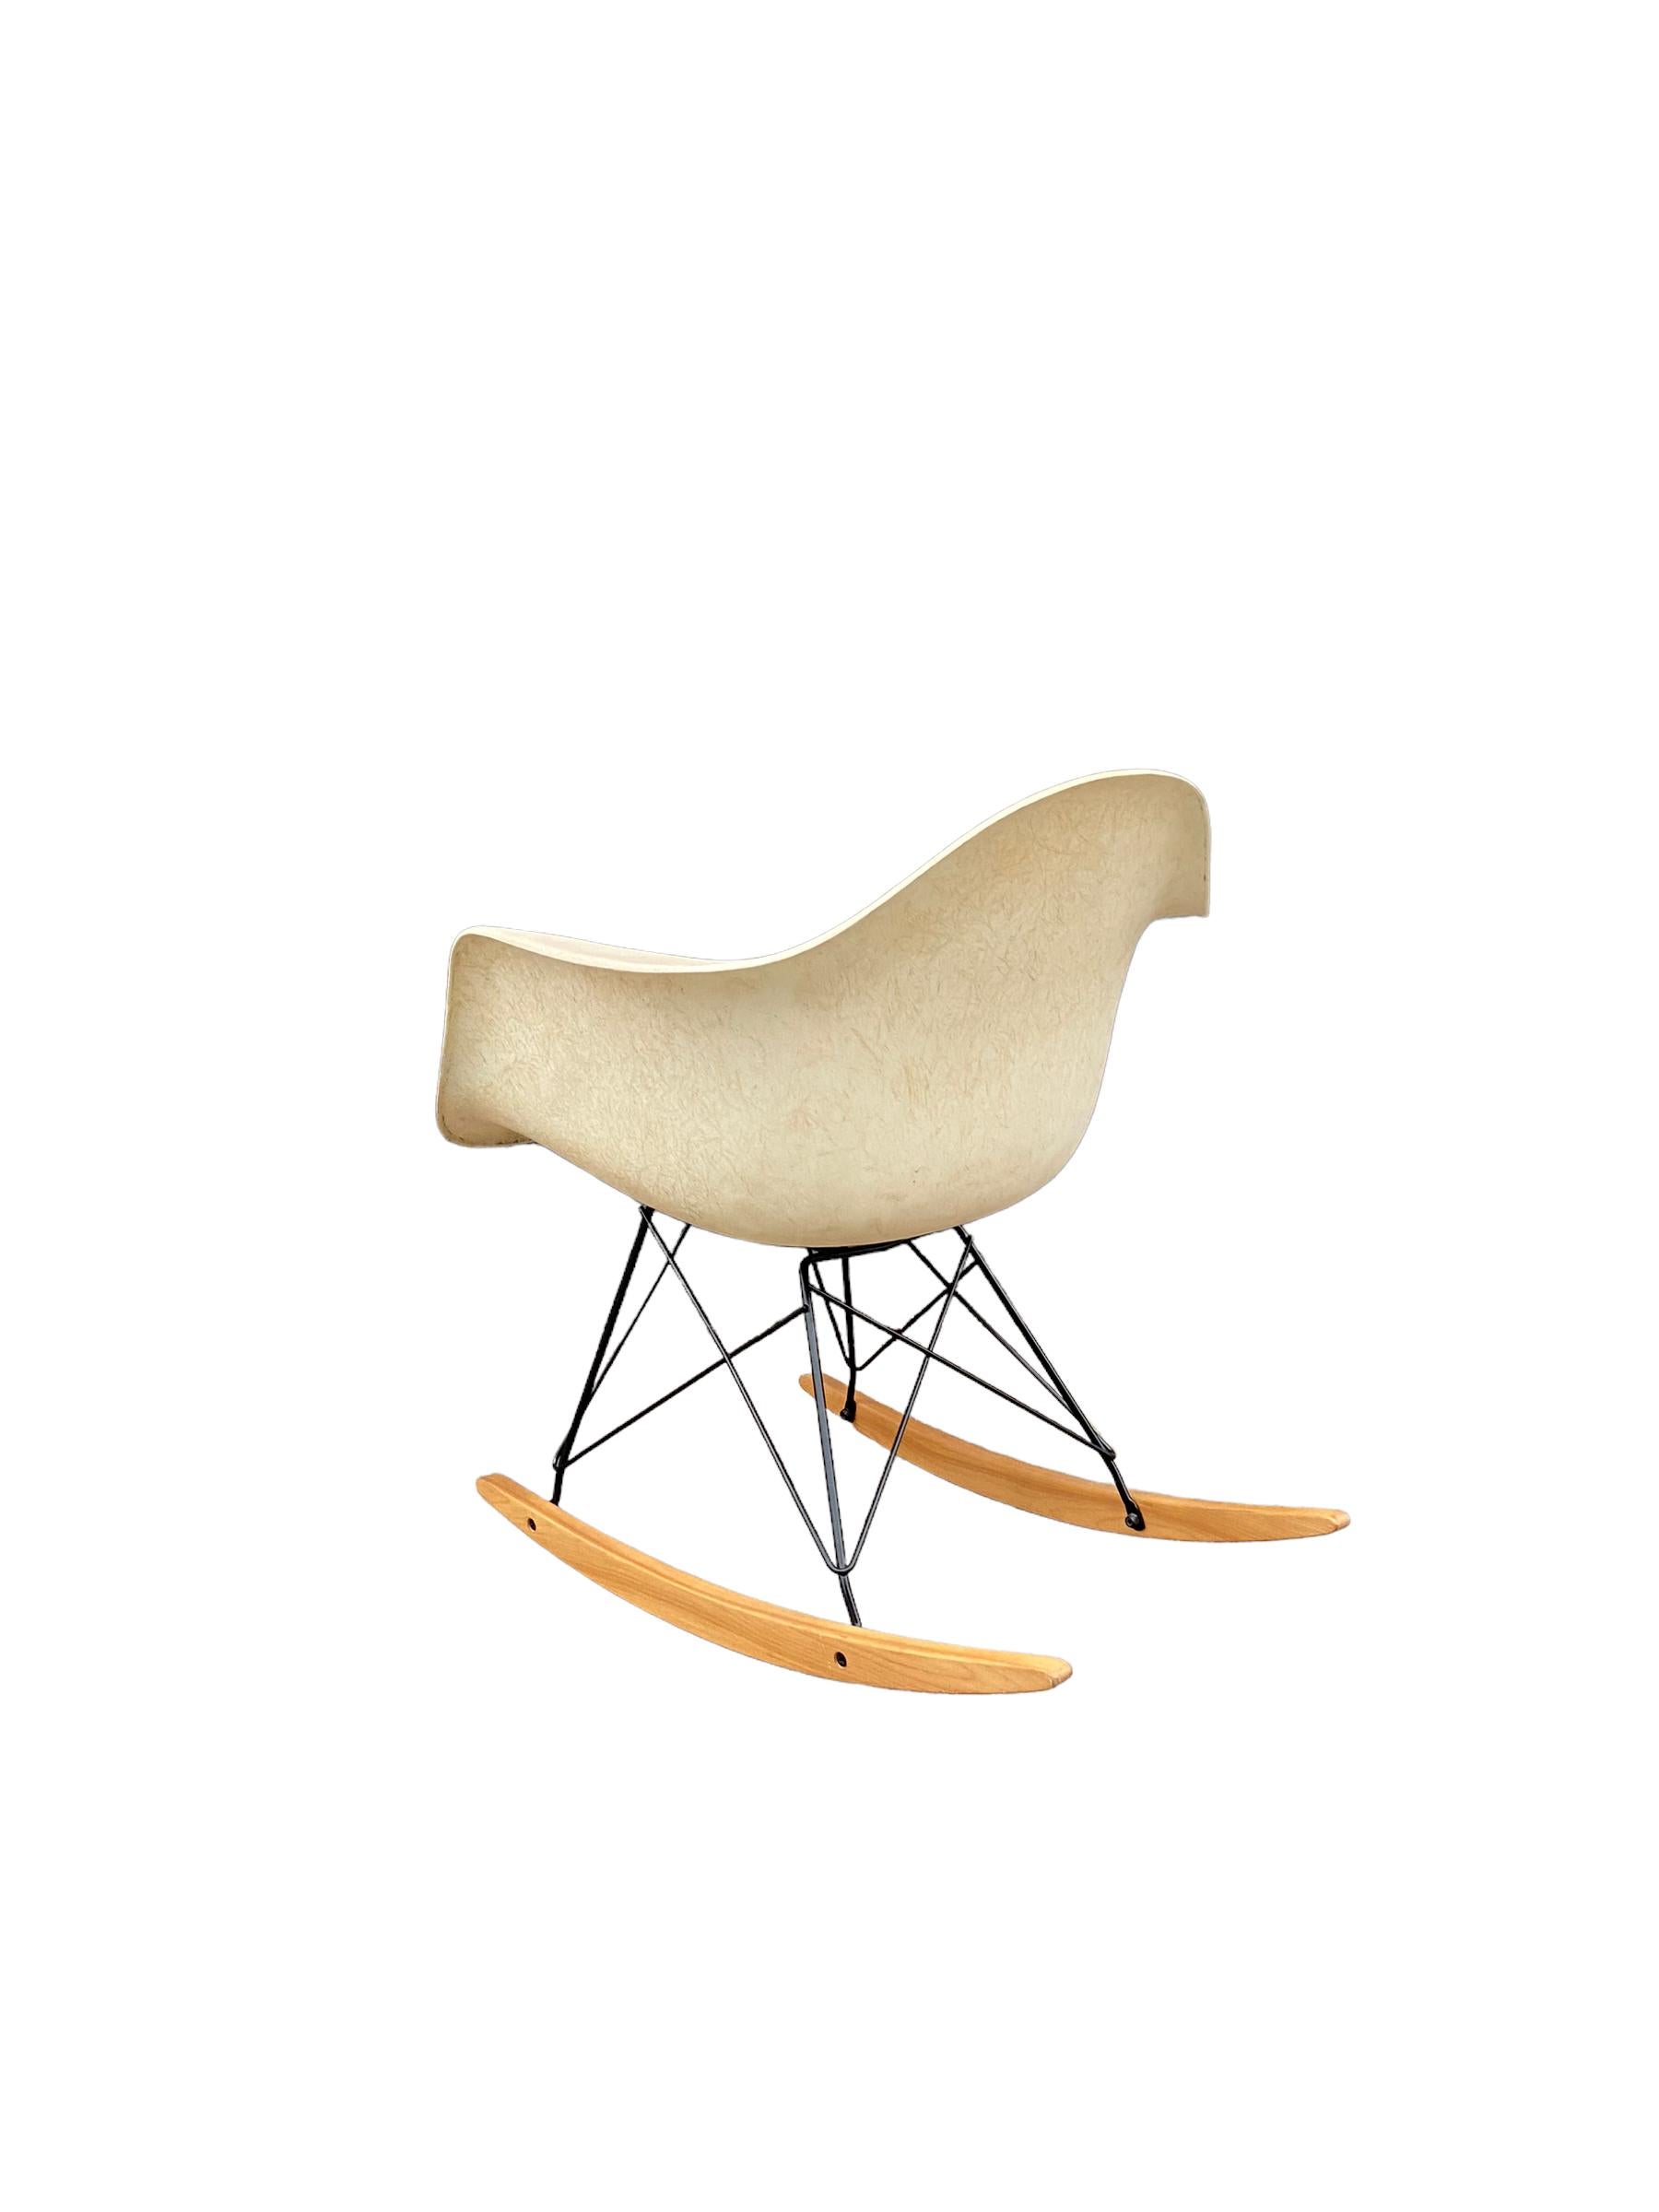 American Eames RAR Parchment Rocking Chair for Herman Miller For Sale